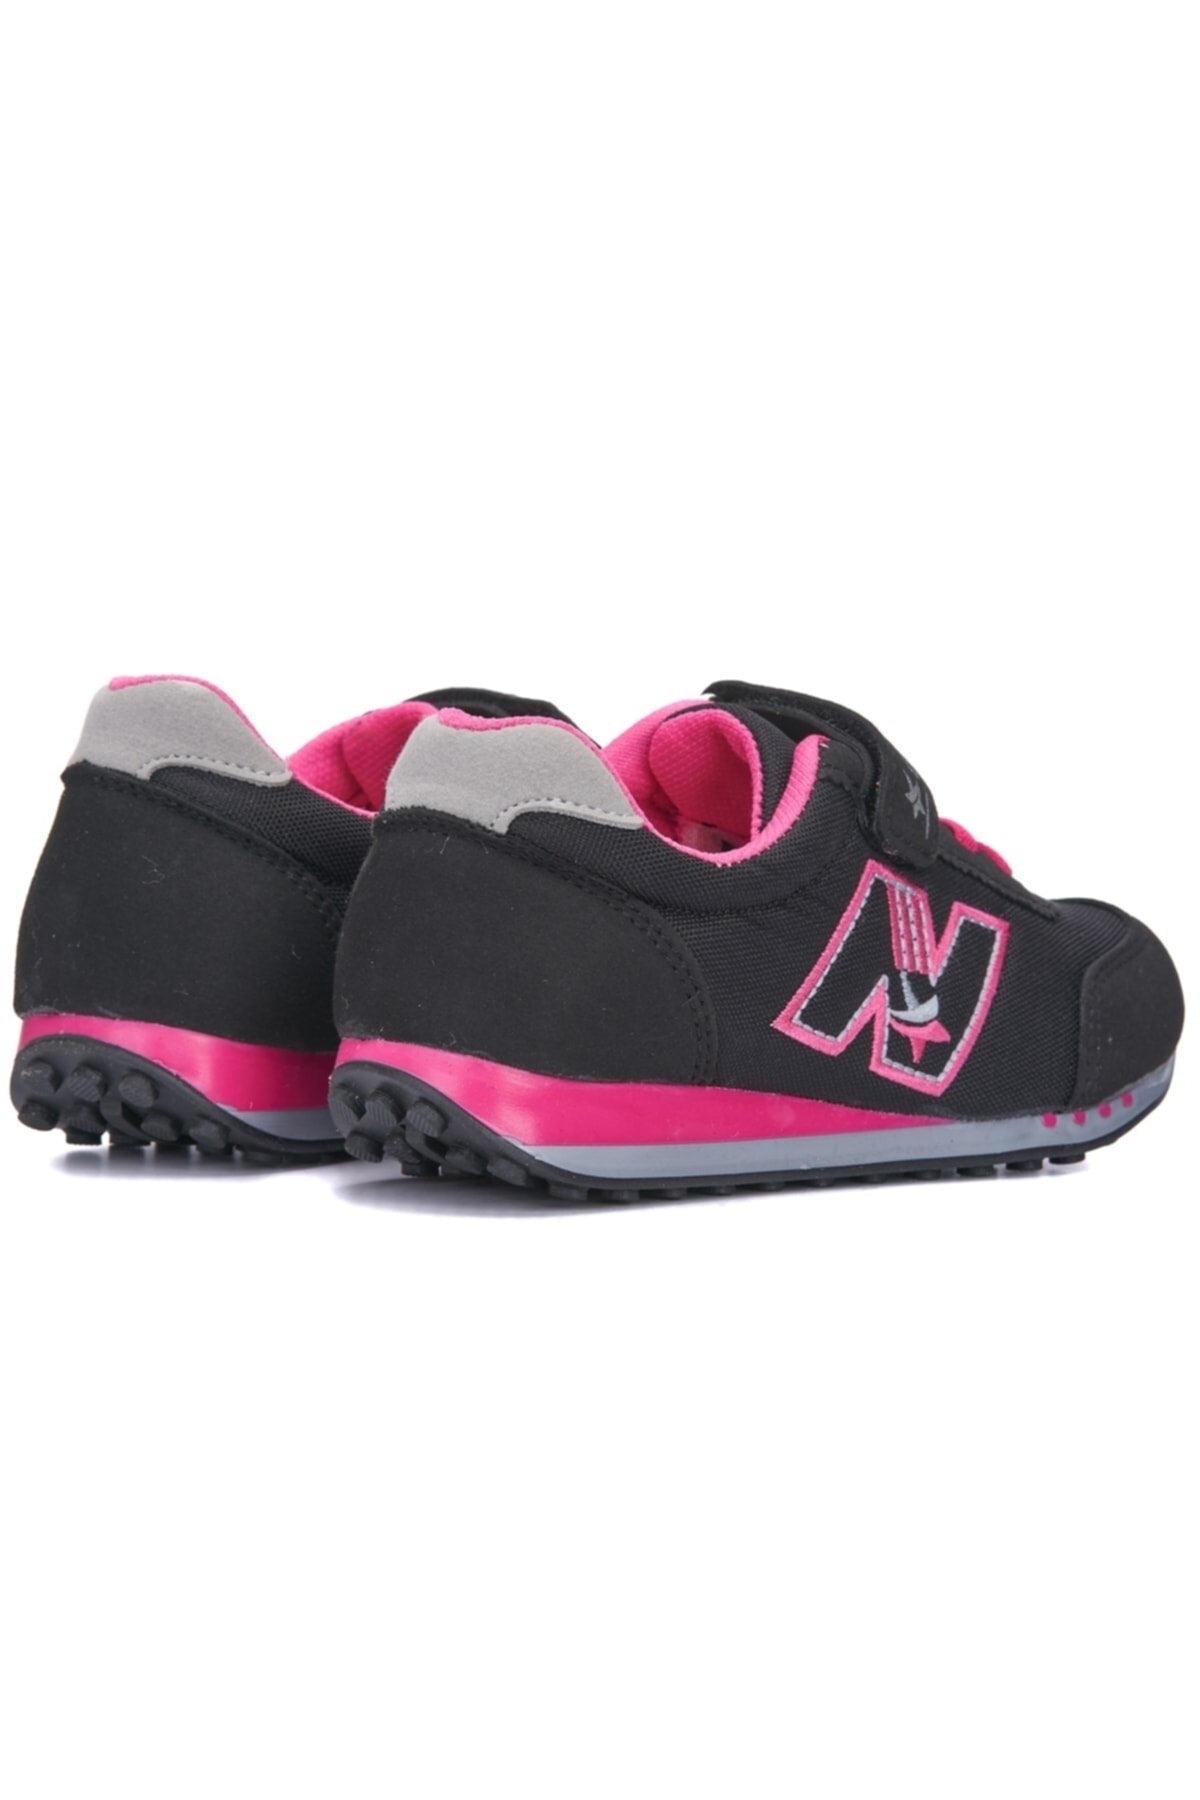 Black - Children's Sport Shoes Call and Laced Daily Casual Sneaker